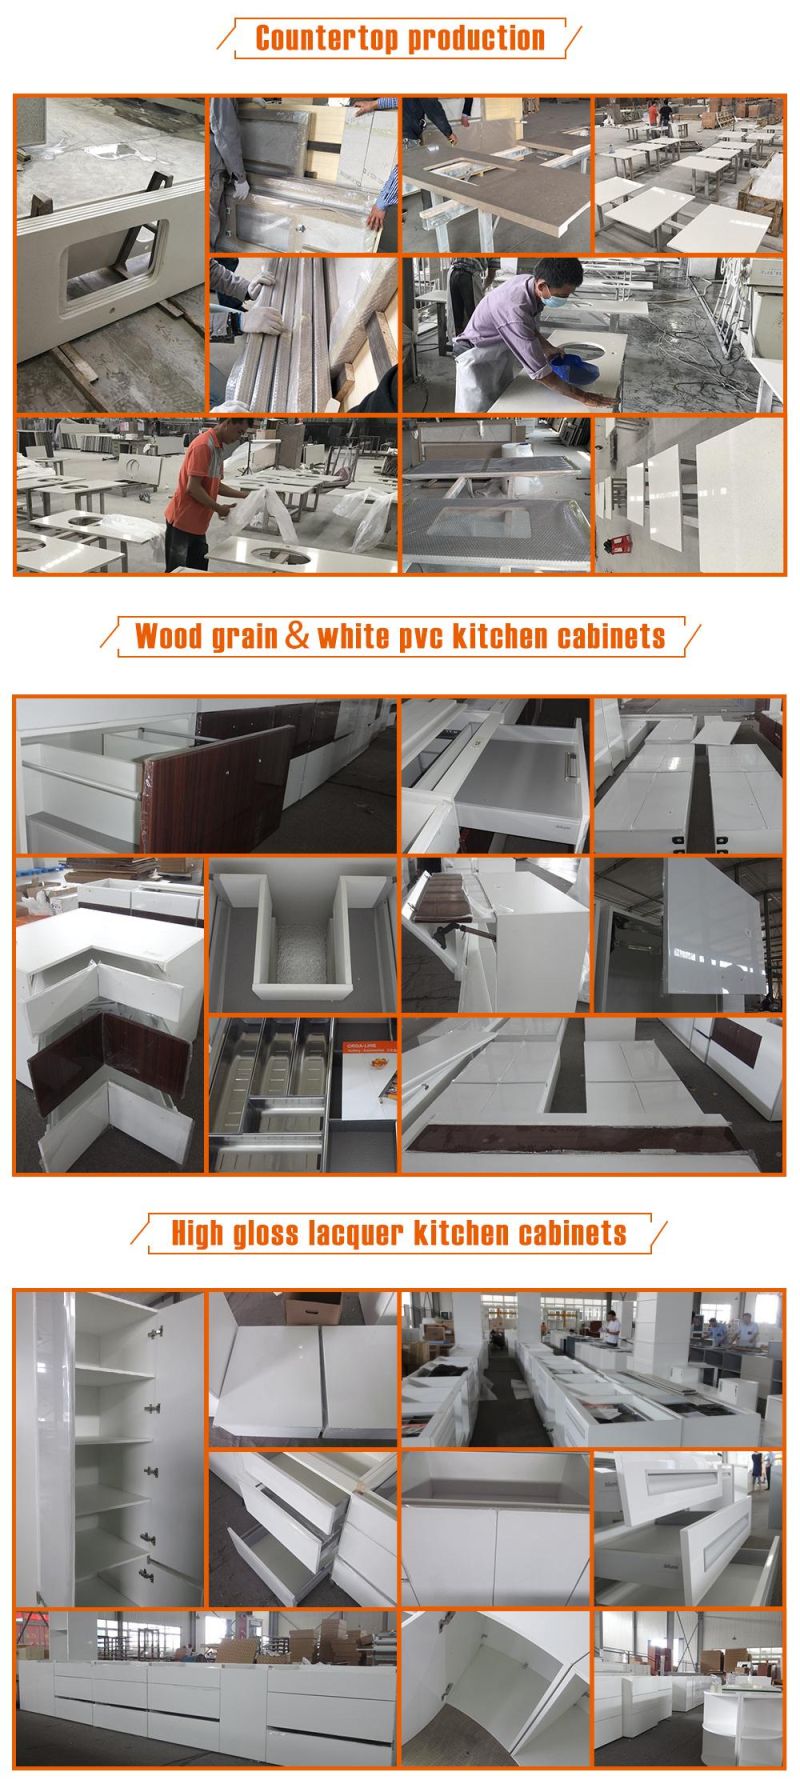 Modern Used Commercial Stainless Steel Sinks Tiles Floor China Kitchen Cabinets Furniture